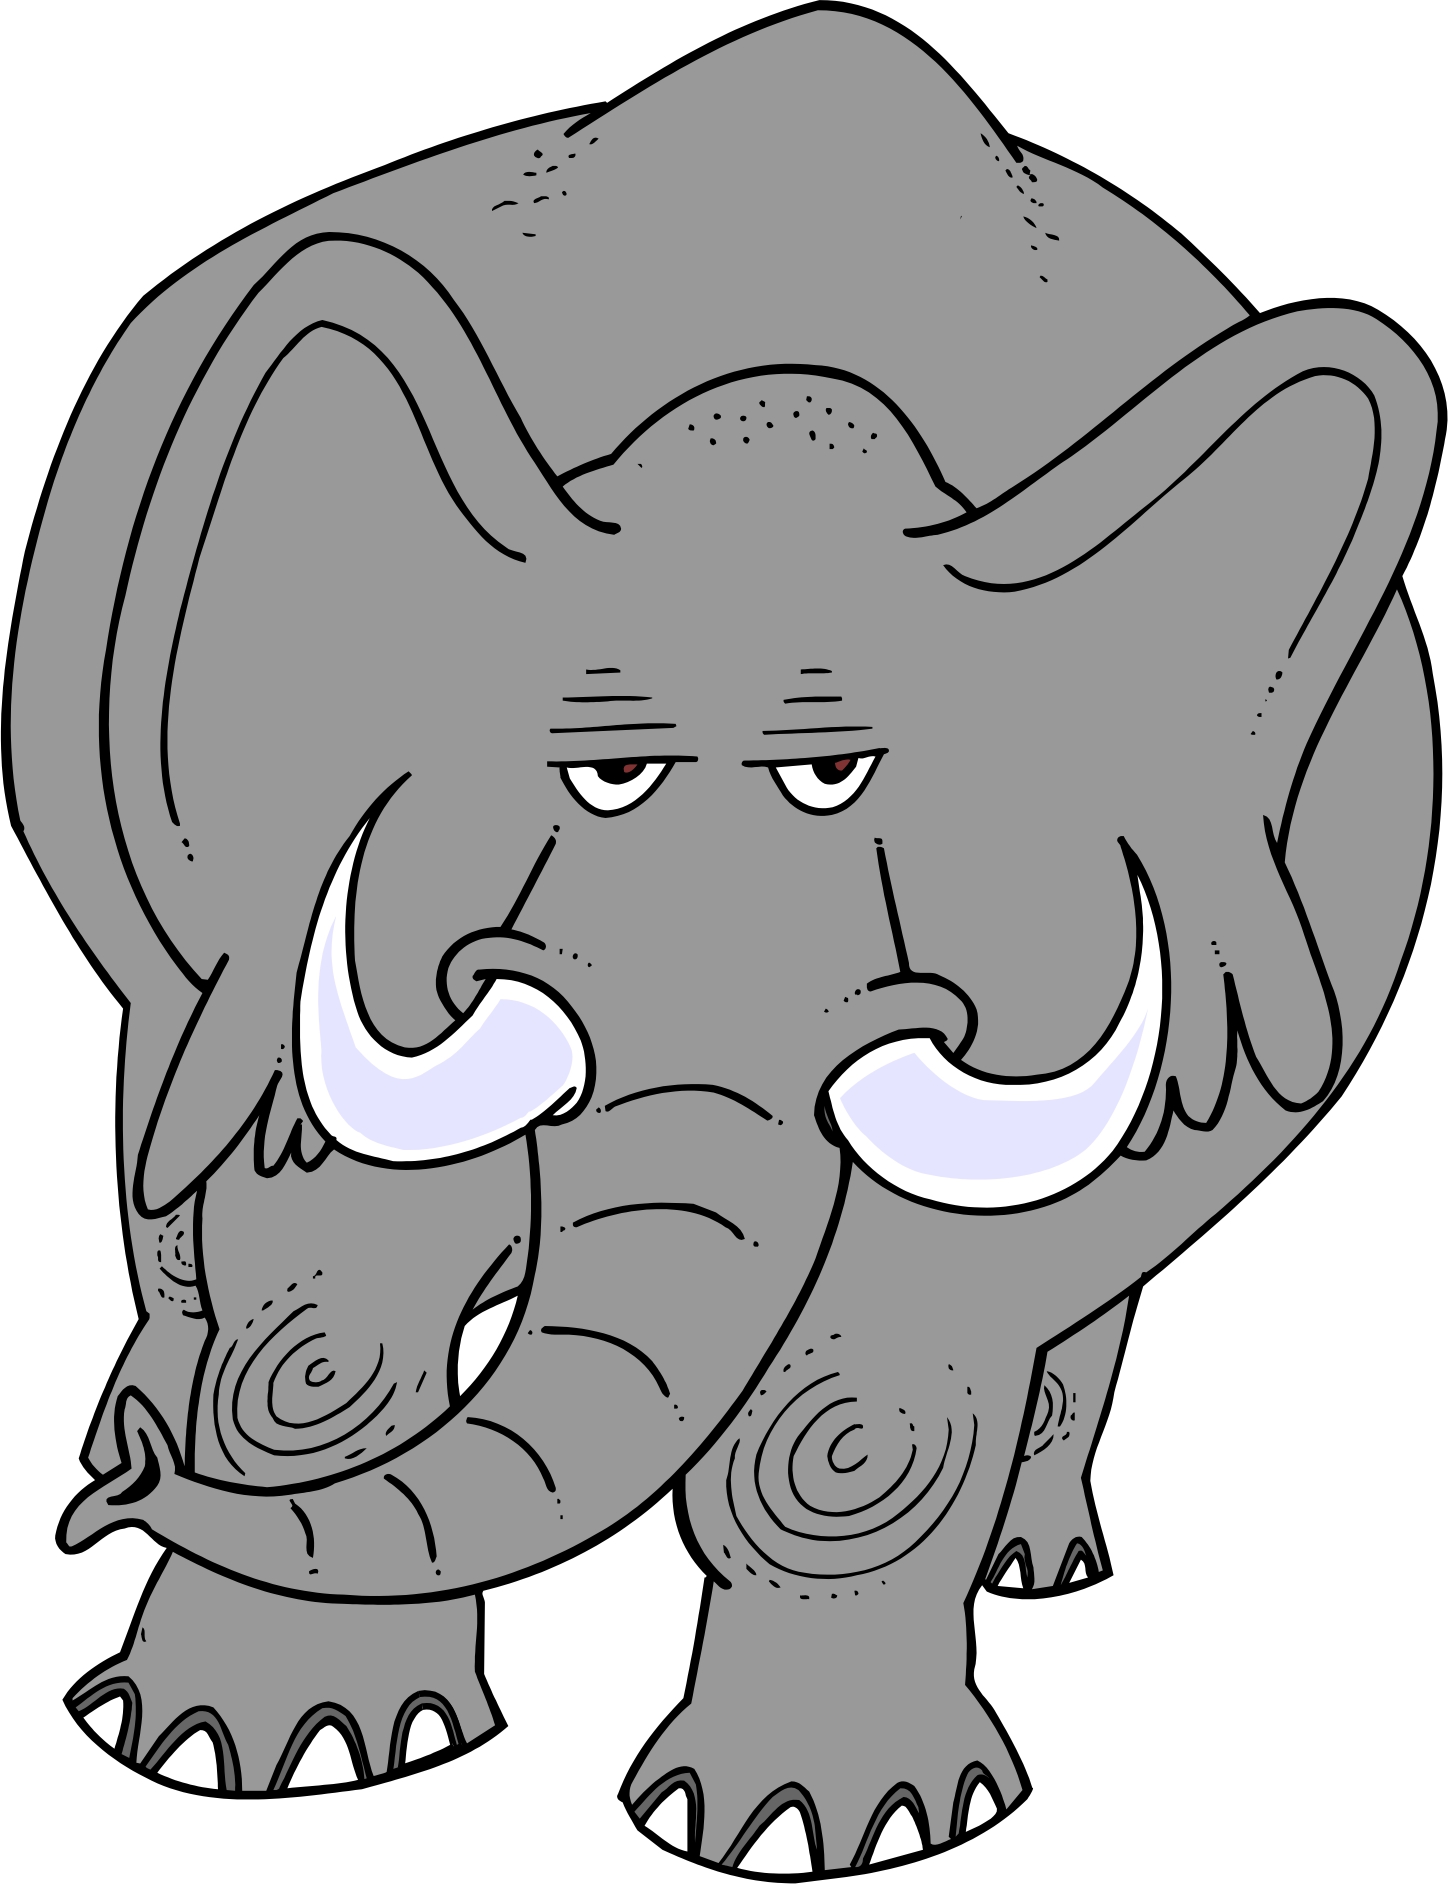 Cartoon Picture Of An Elephant - Clipart library